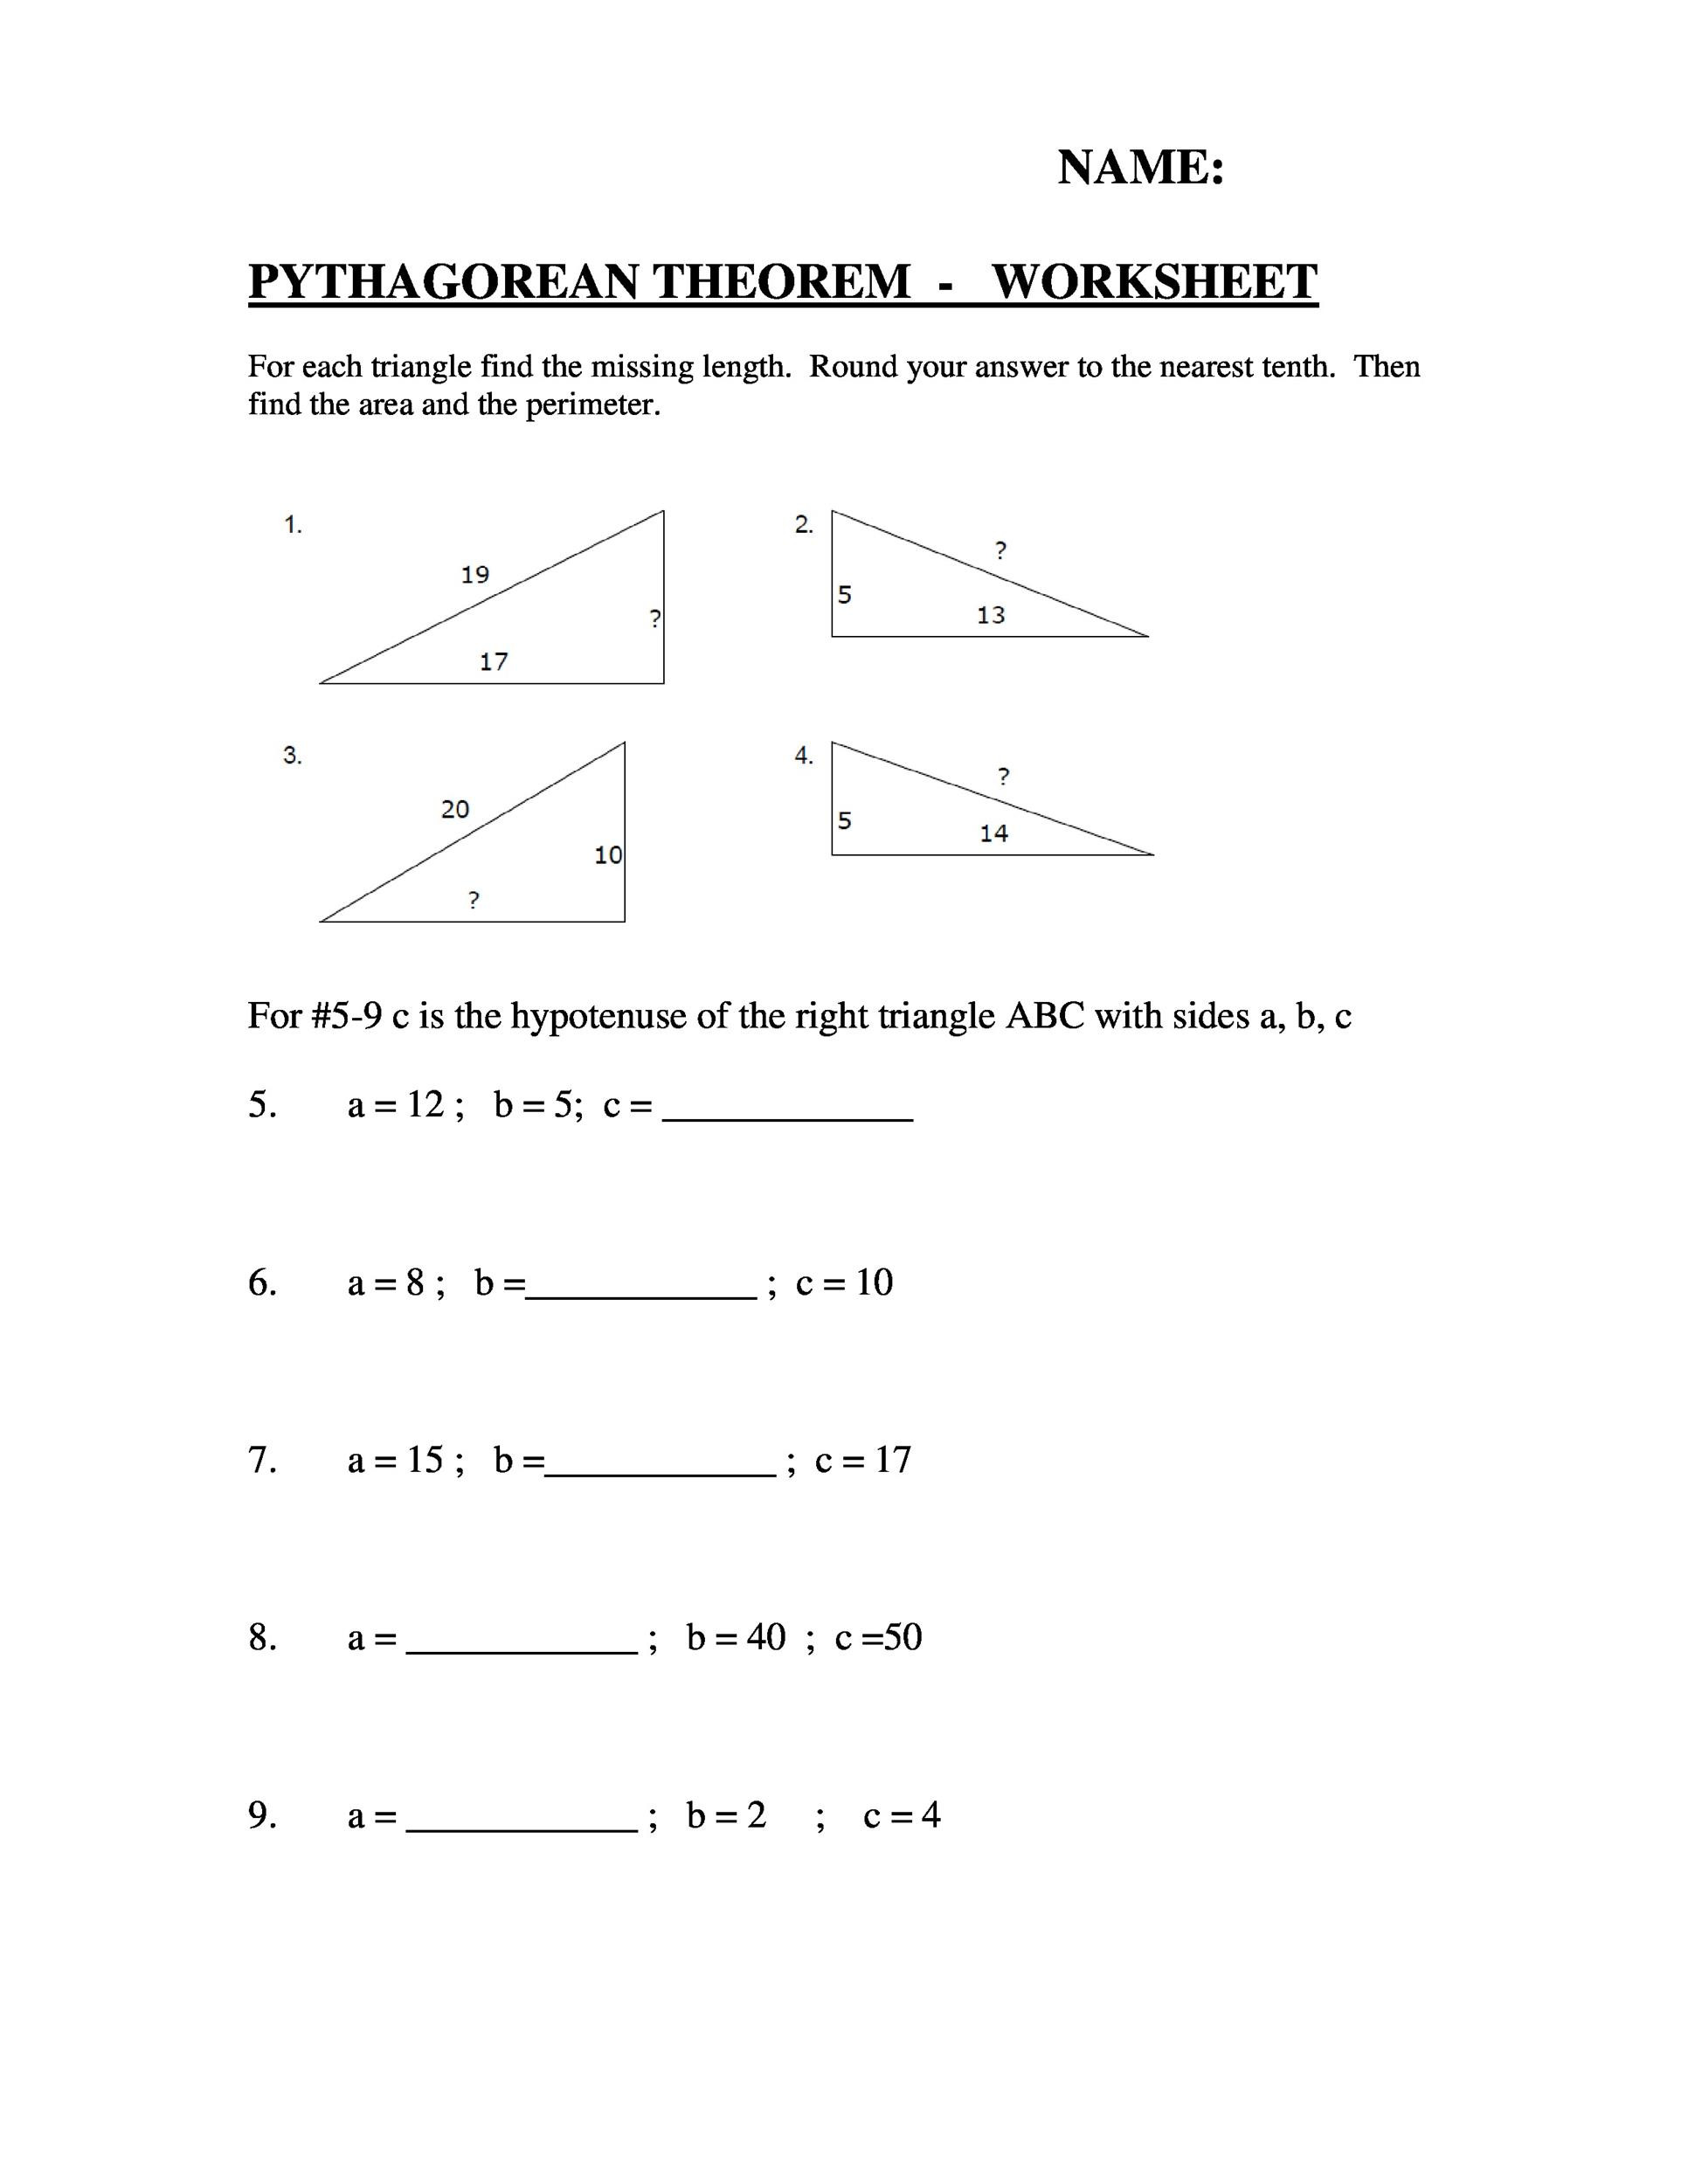 Pythagoras theorem Worksheet with Answers 48 Pythagorean theorem Worksheet with Answers [word Pdf]